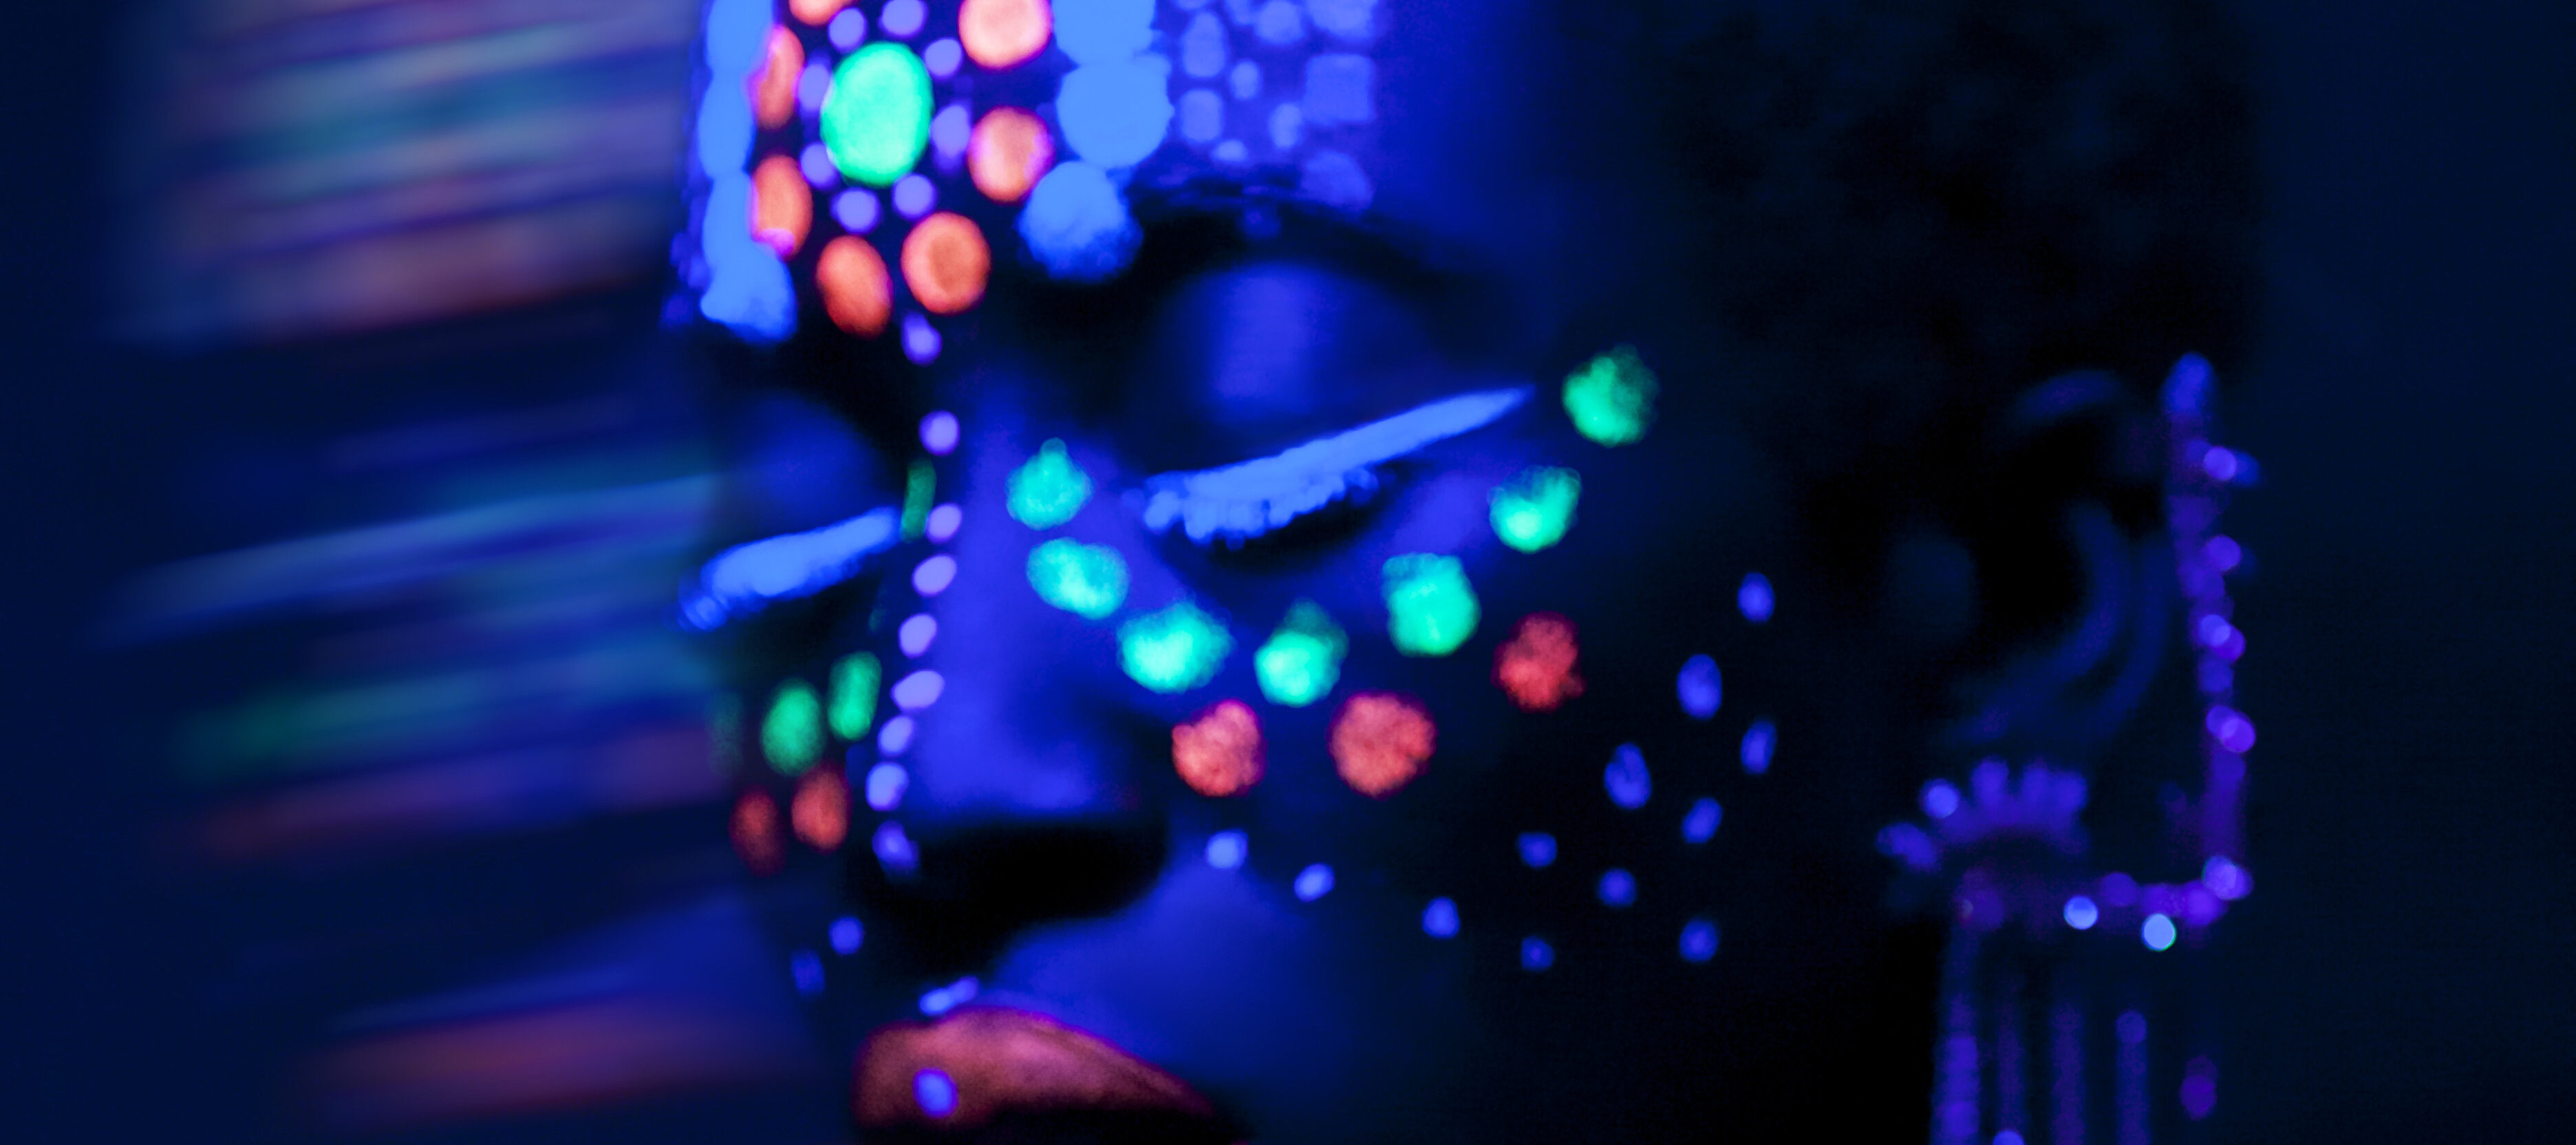 A dark-skinned woman stands in a dark space illuminated by a black light. Her face is painted with green, orange, and white dots and orange lipstick that all glow in the black light. She wears a beaded top and an earring with strands of beads that run from her earlobe to the top of her ear.